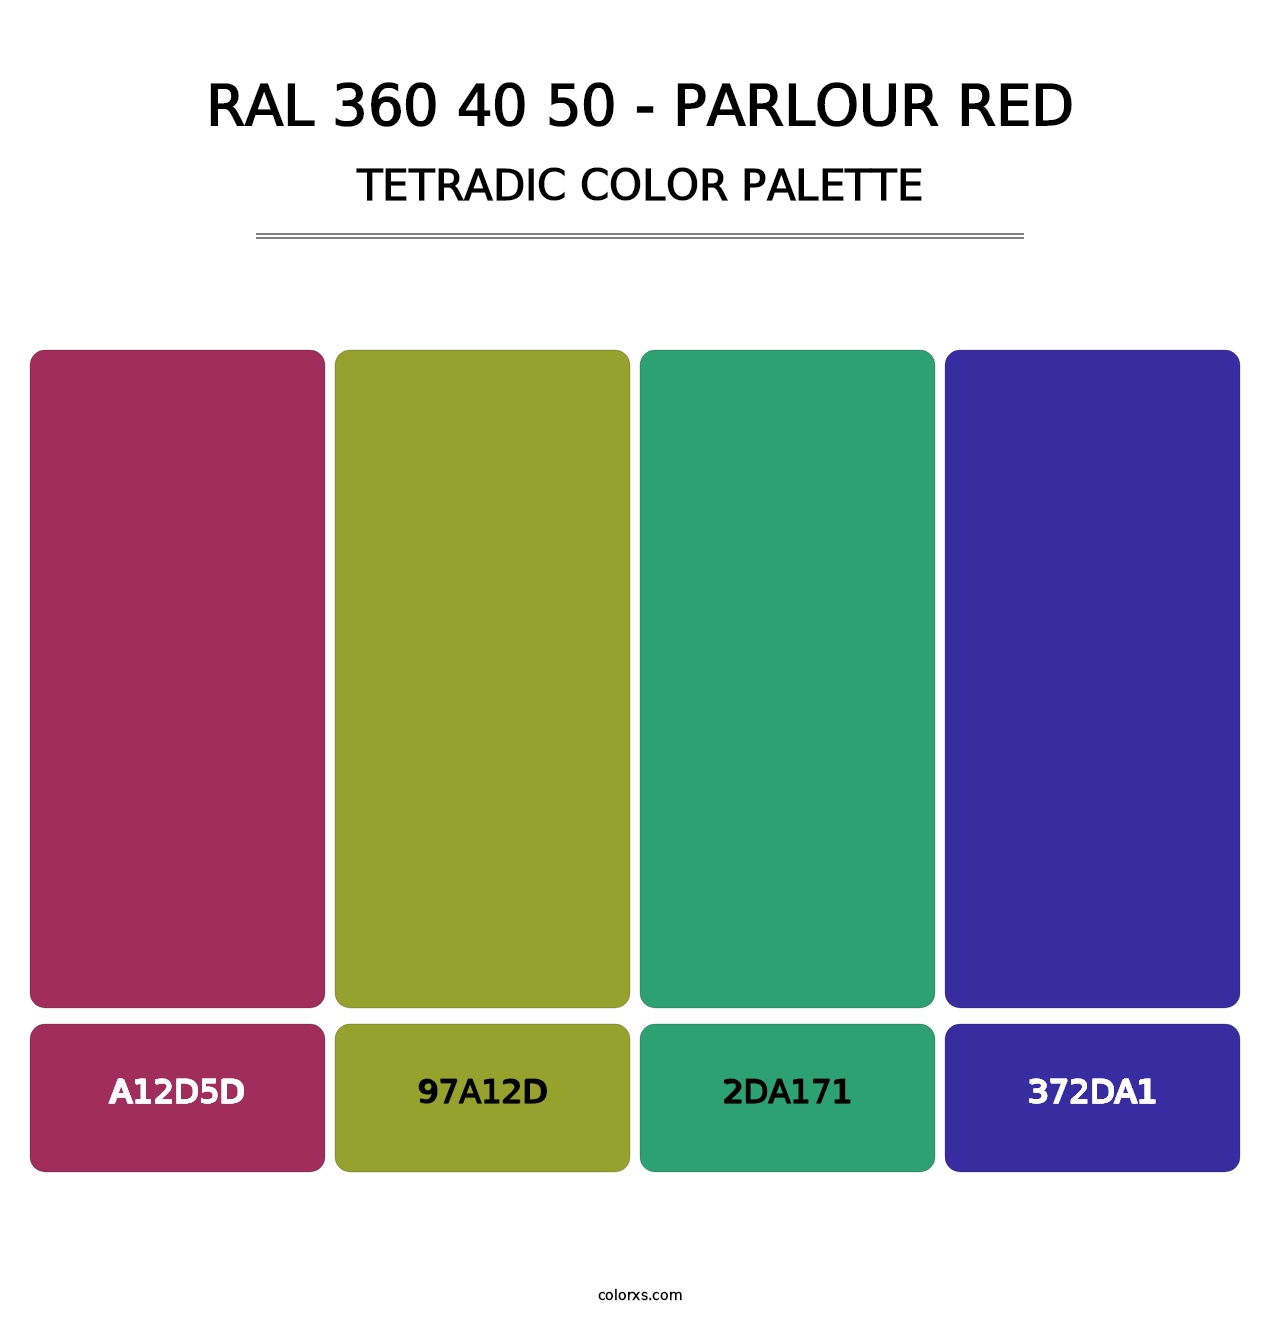 RAL 360 40 50 - Parlour Red - Tetradic Color Palette